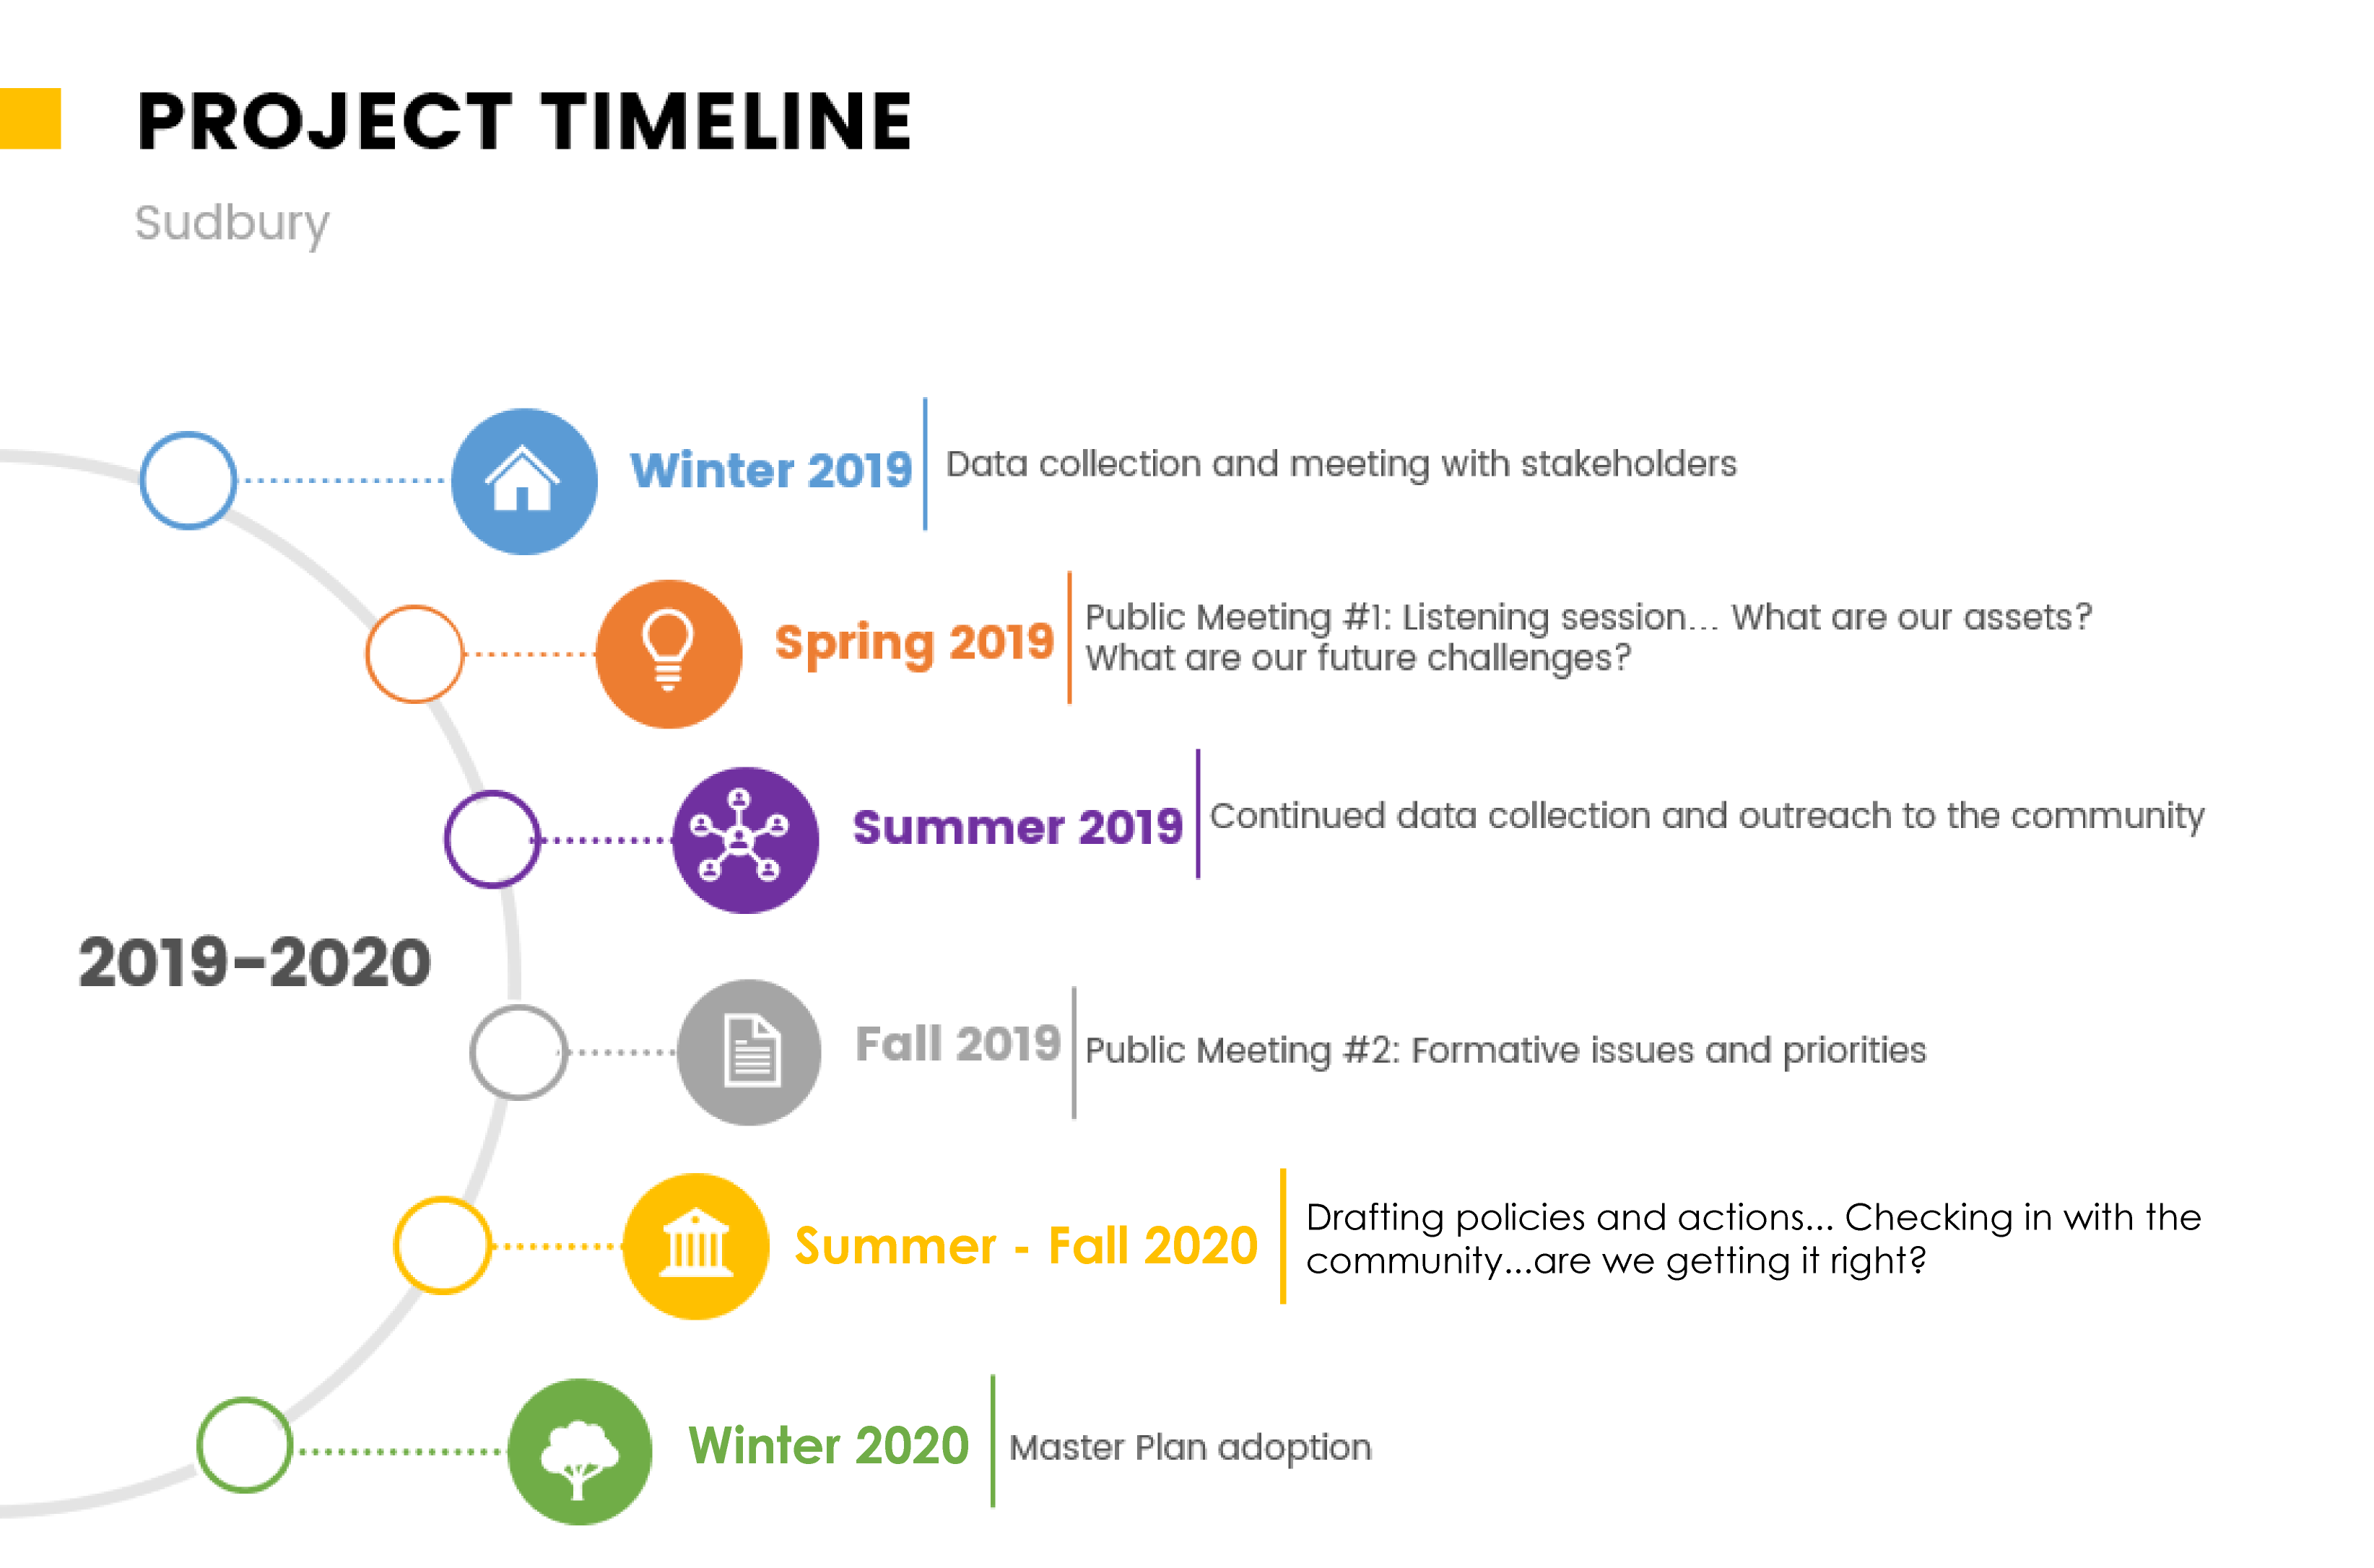 Project Timeline, Sudbury, 2019 to 2020. Winter 2019: Data collection and meeting with stakeholders. Spring 2019: Public Meeting #1: Listening session... What are our assets? What are our future challenges? Summer 2019: Continued data collection and outreach to the community. Fall 2019: Public Meeting #2: Formative issues and priorities. Summer to Fall 2020: Drafting policies and actions... Checking in with the community... are we getting it right? Winter 2020: Master Plan adoption.